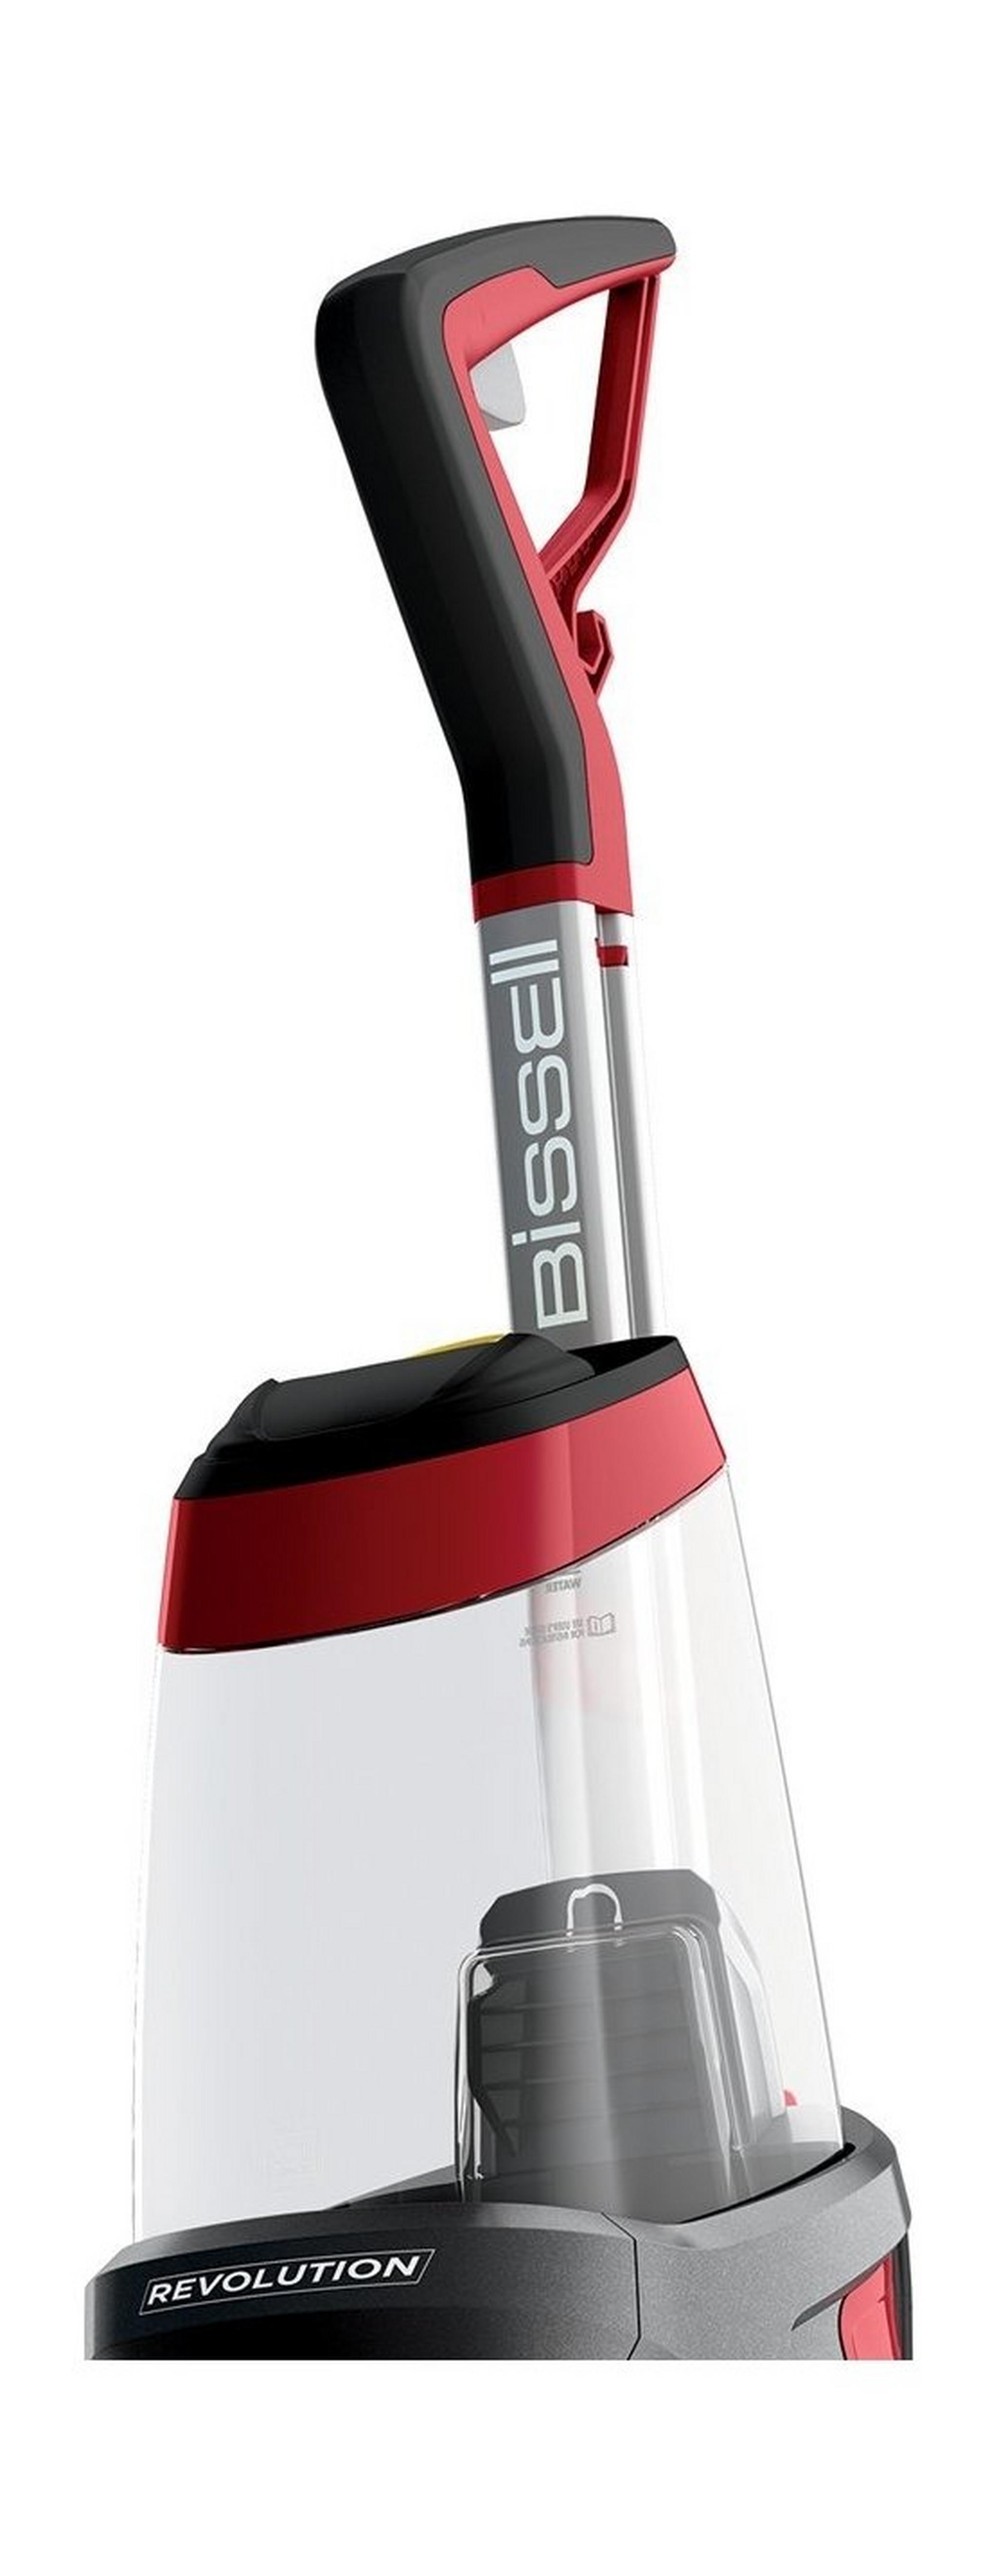 Bissell ProHeat 2X Revolution Carpet Cleaner, 3.7 Litre, 1858E - Black / Red